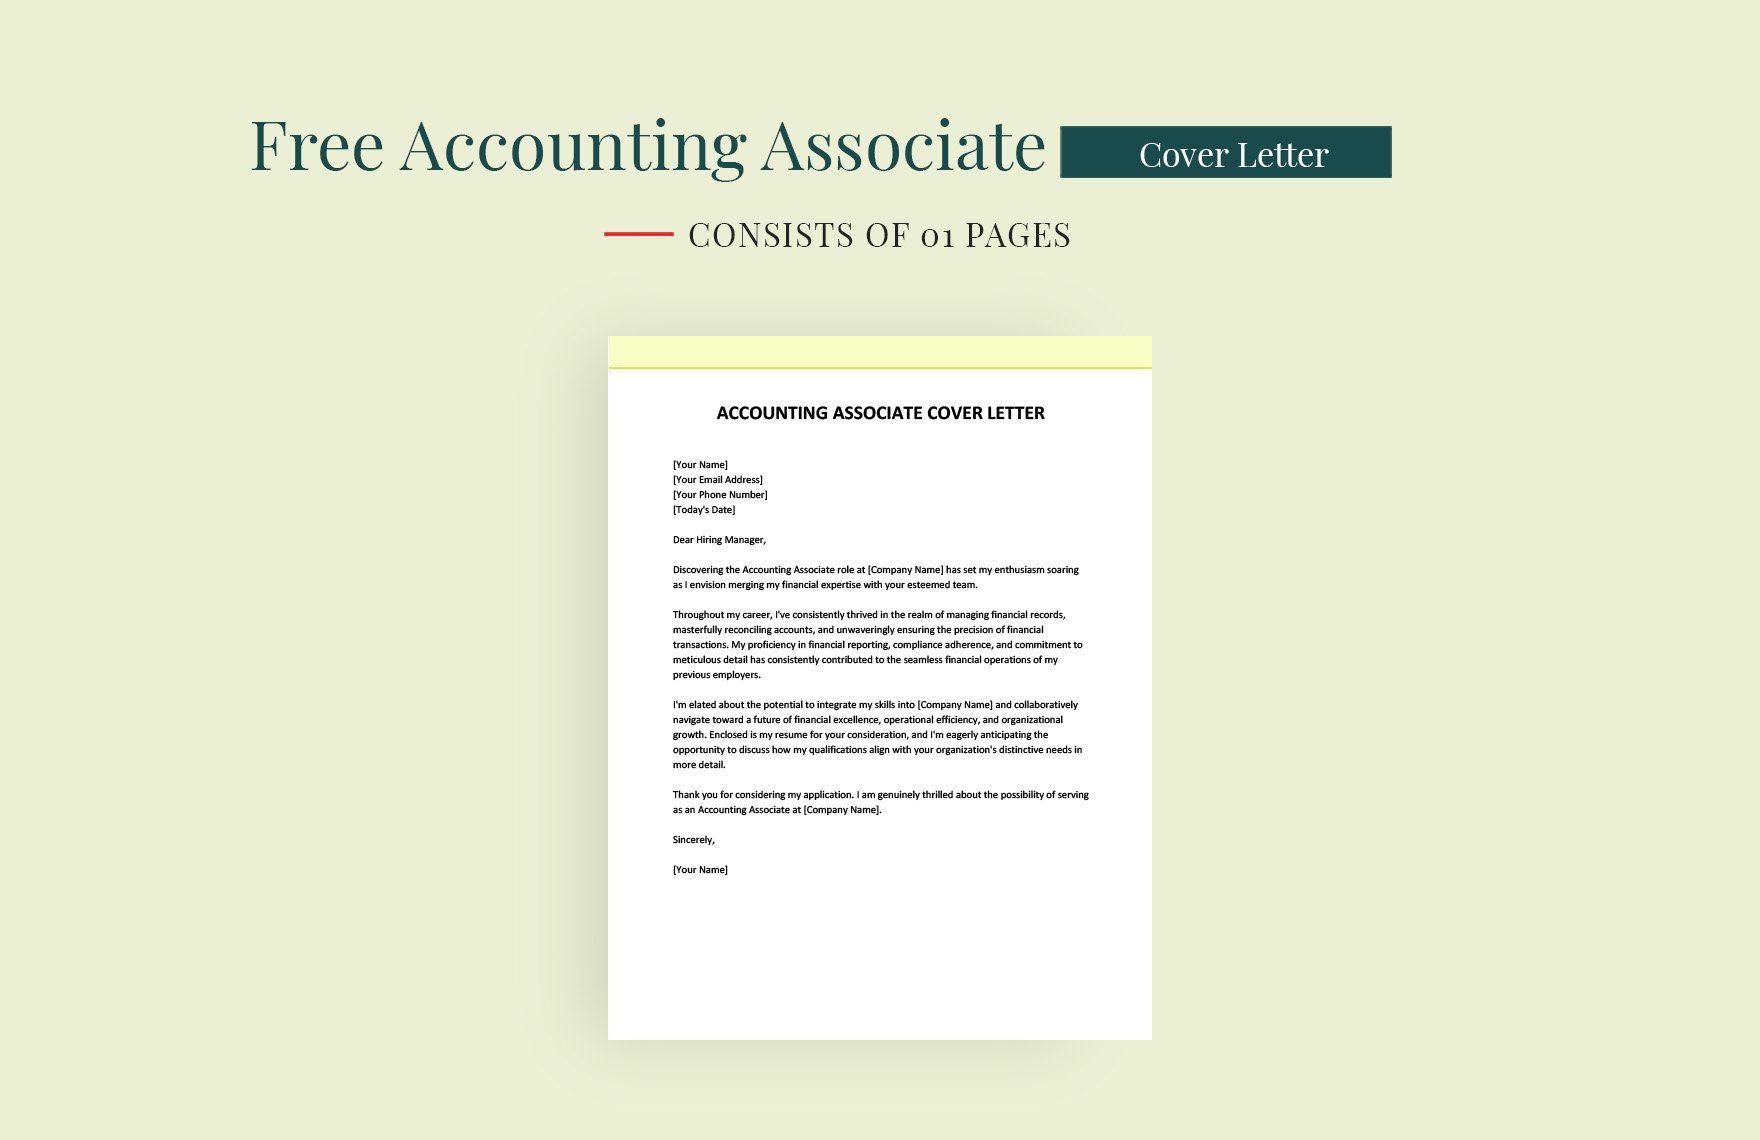 Accounting Associate Cover Letter in Word, Google Docs